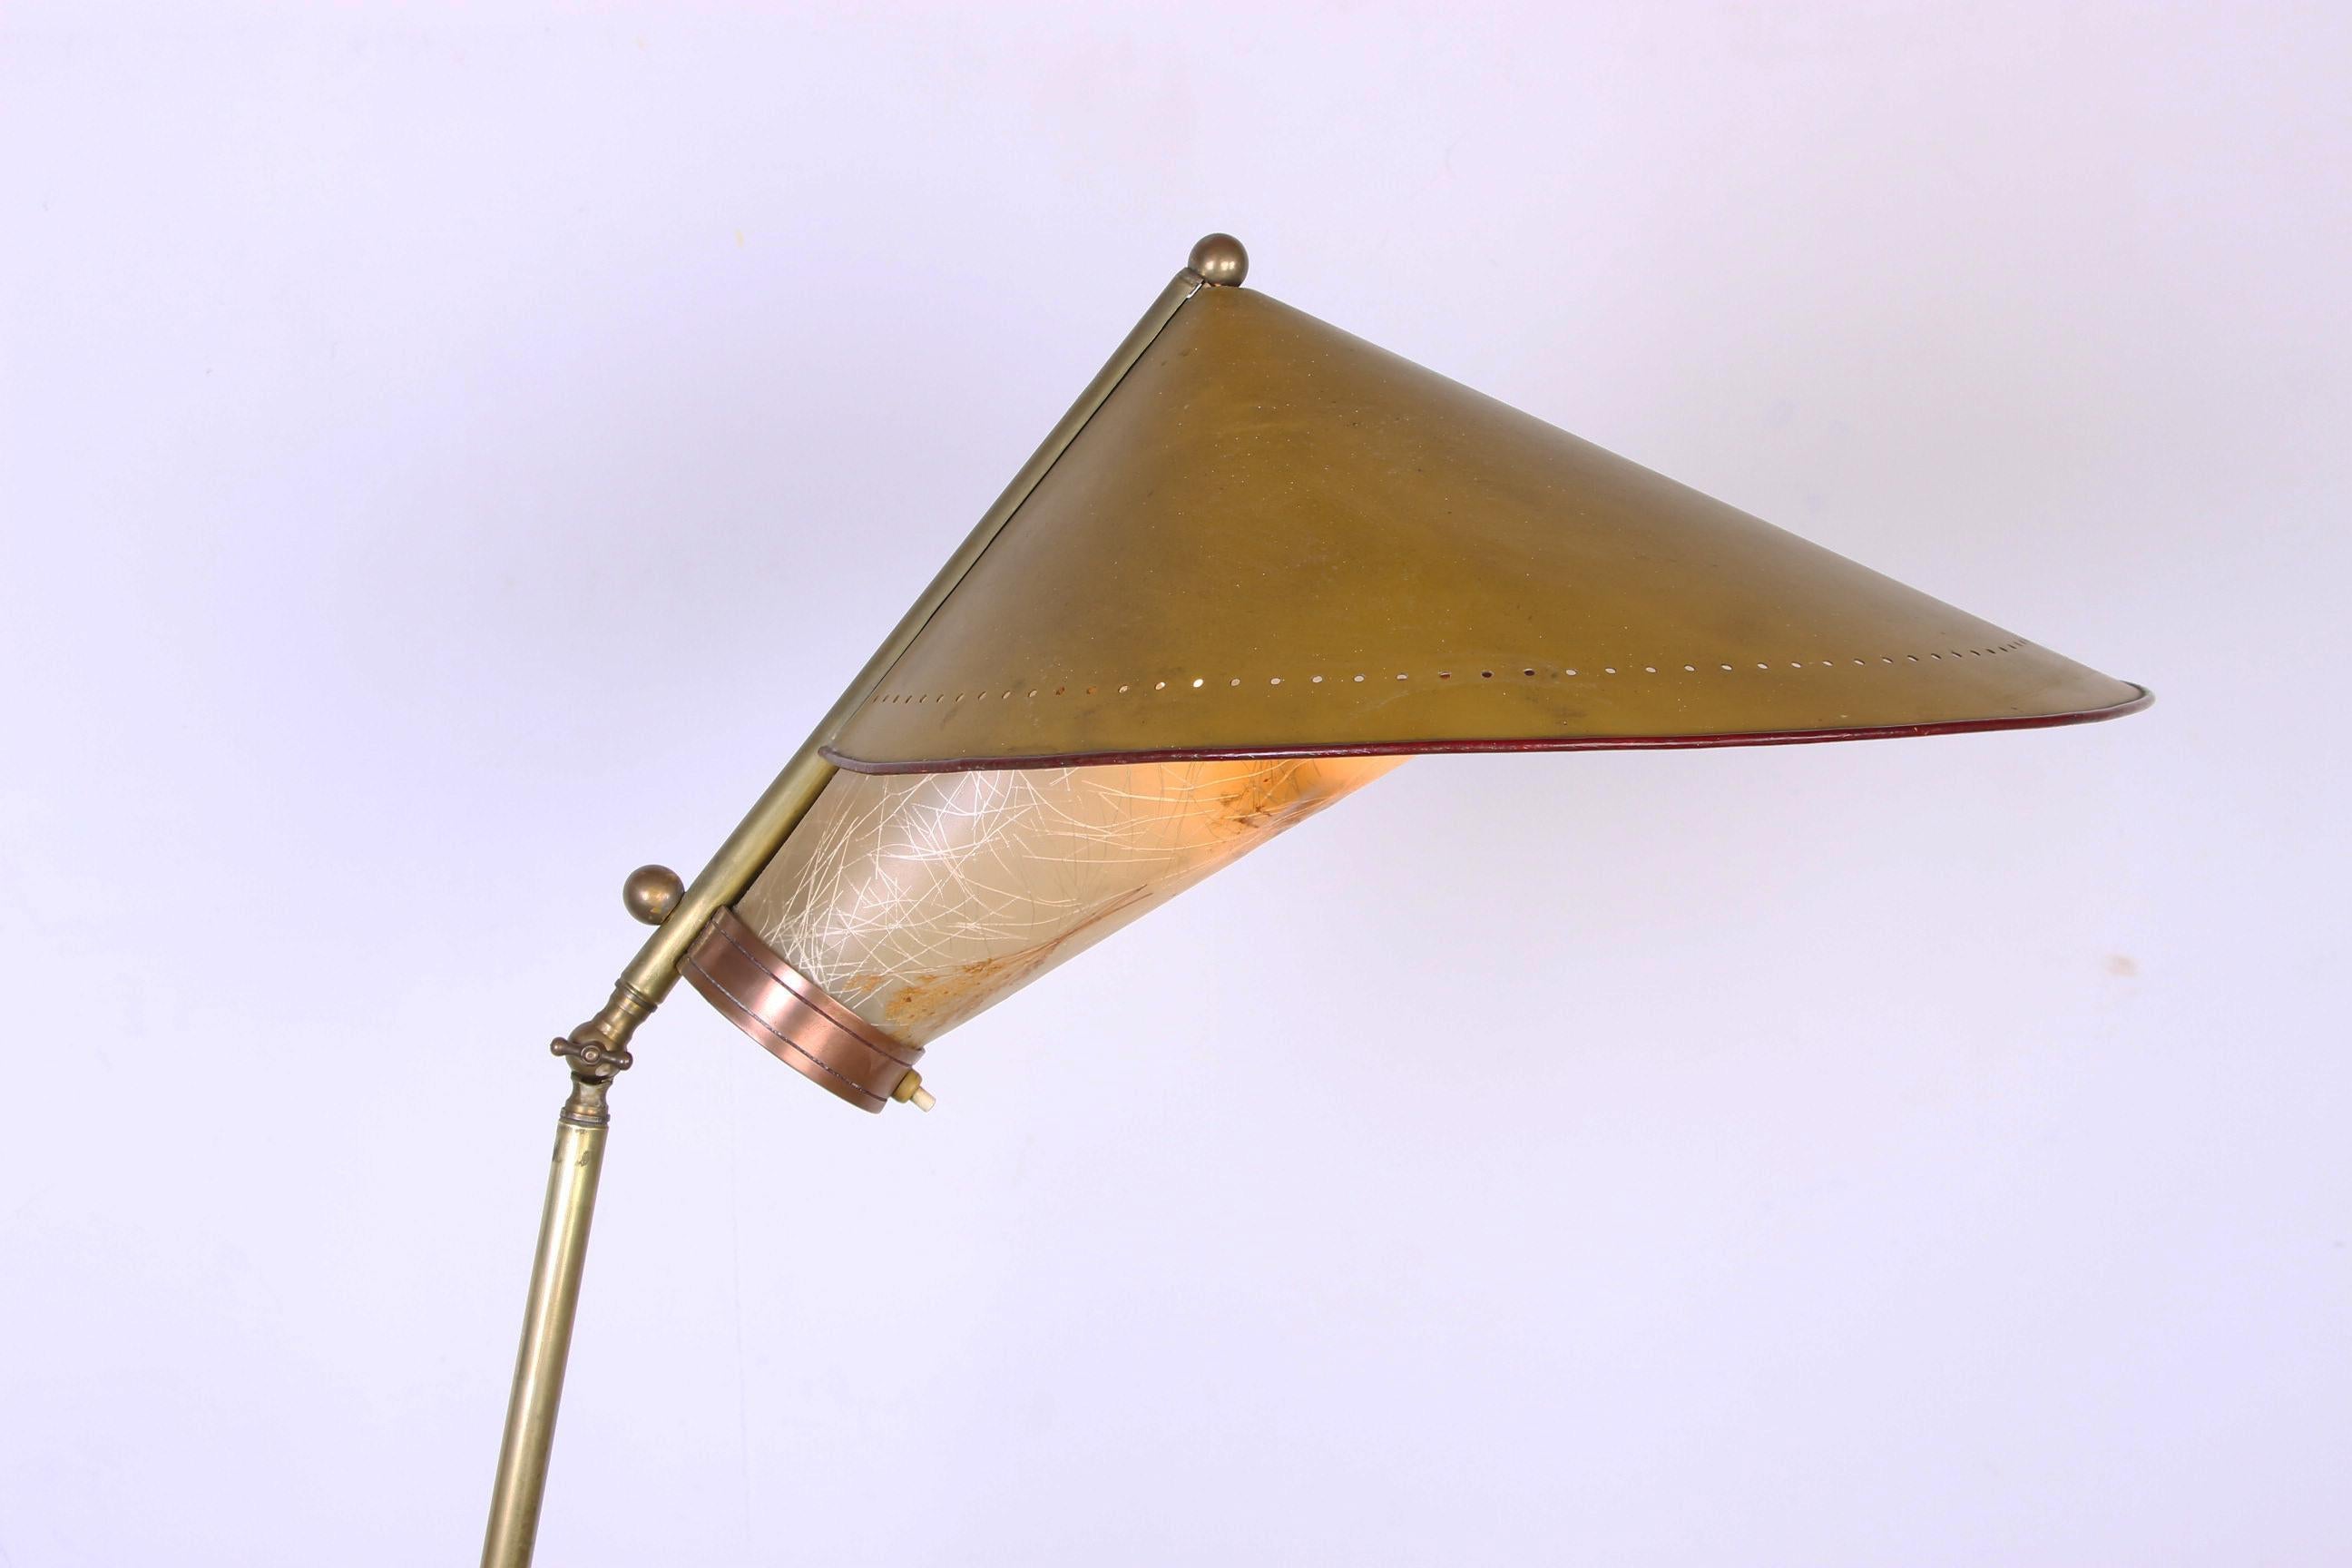 Italian Brass Floor Lamp Was Conical Adjustable in Inclination and Height Stilno 1